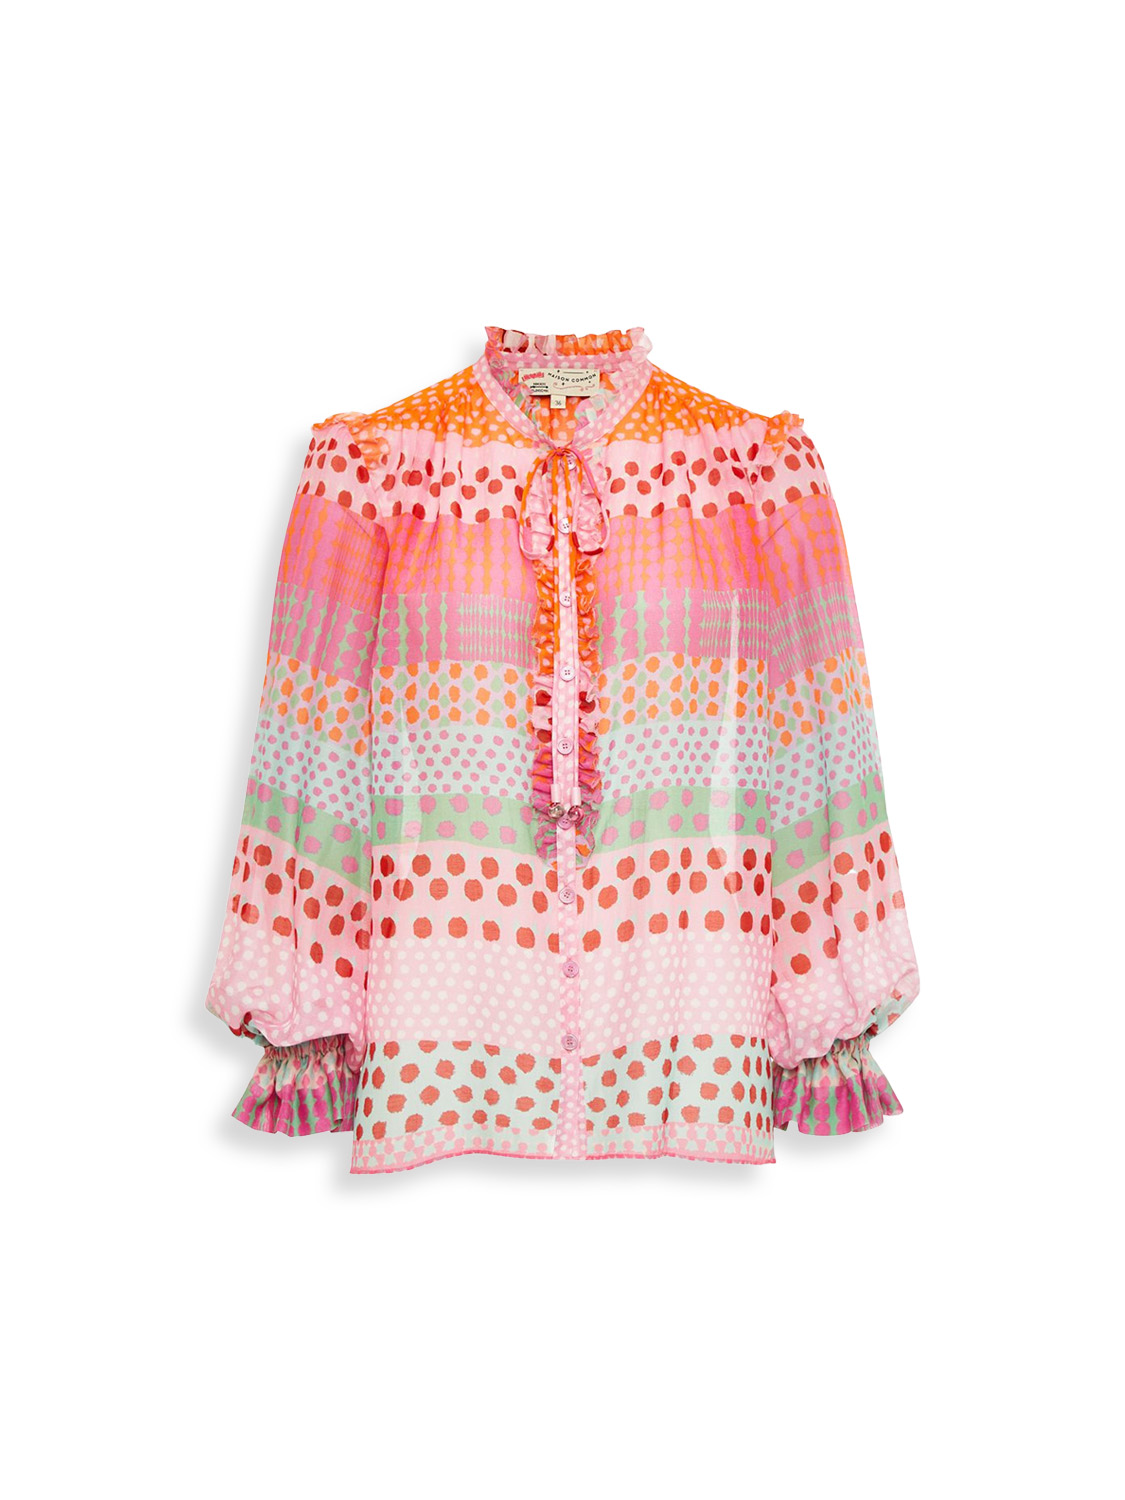 Long sleeve colorful print blouse with ruffle details - Ruffle blouse with colorful print